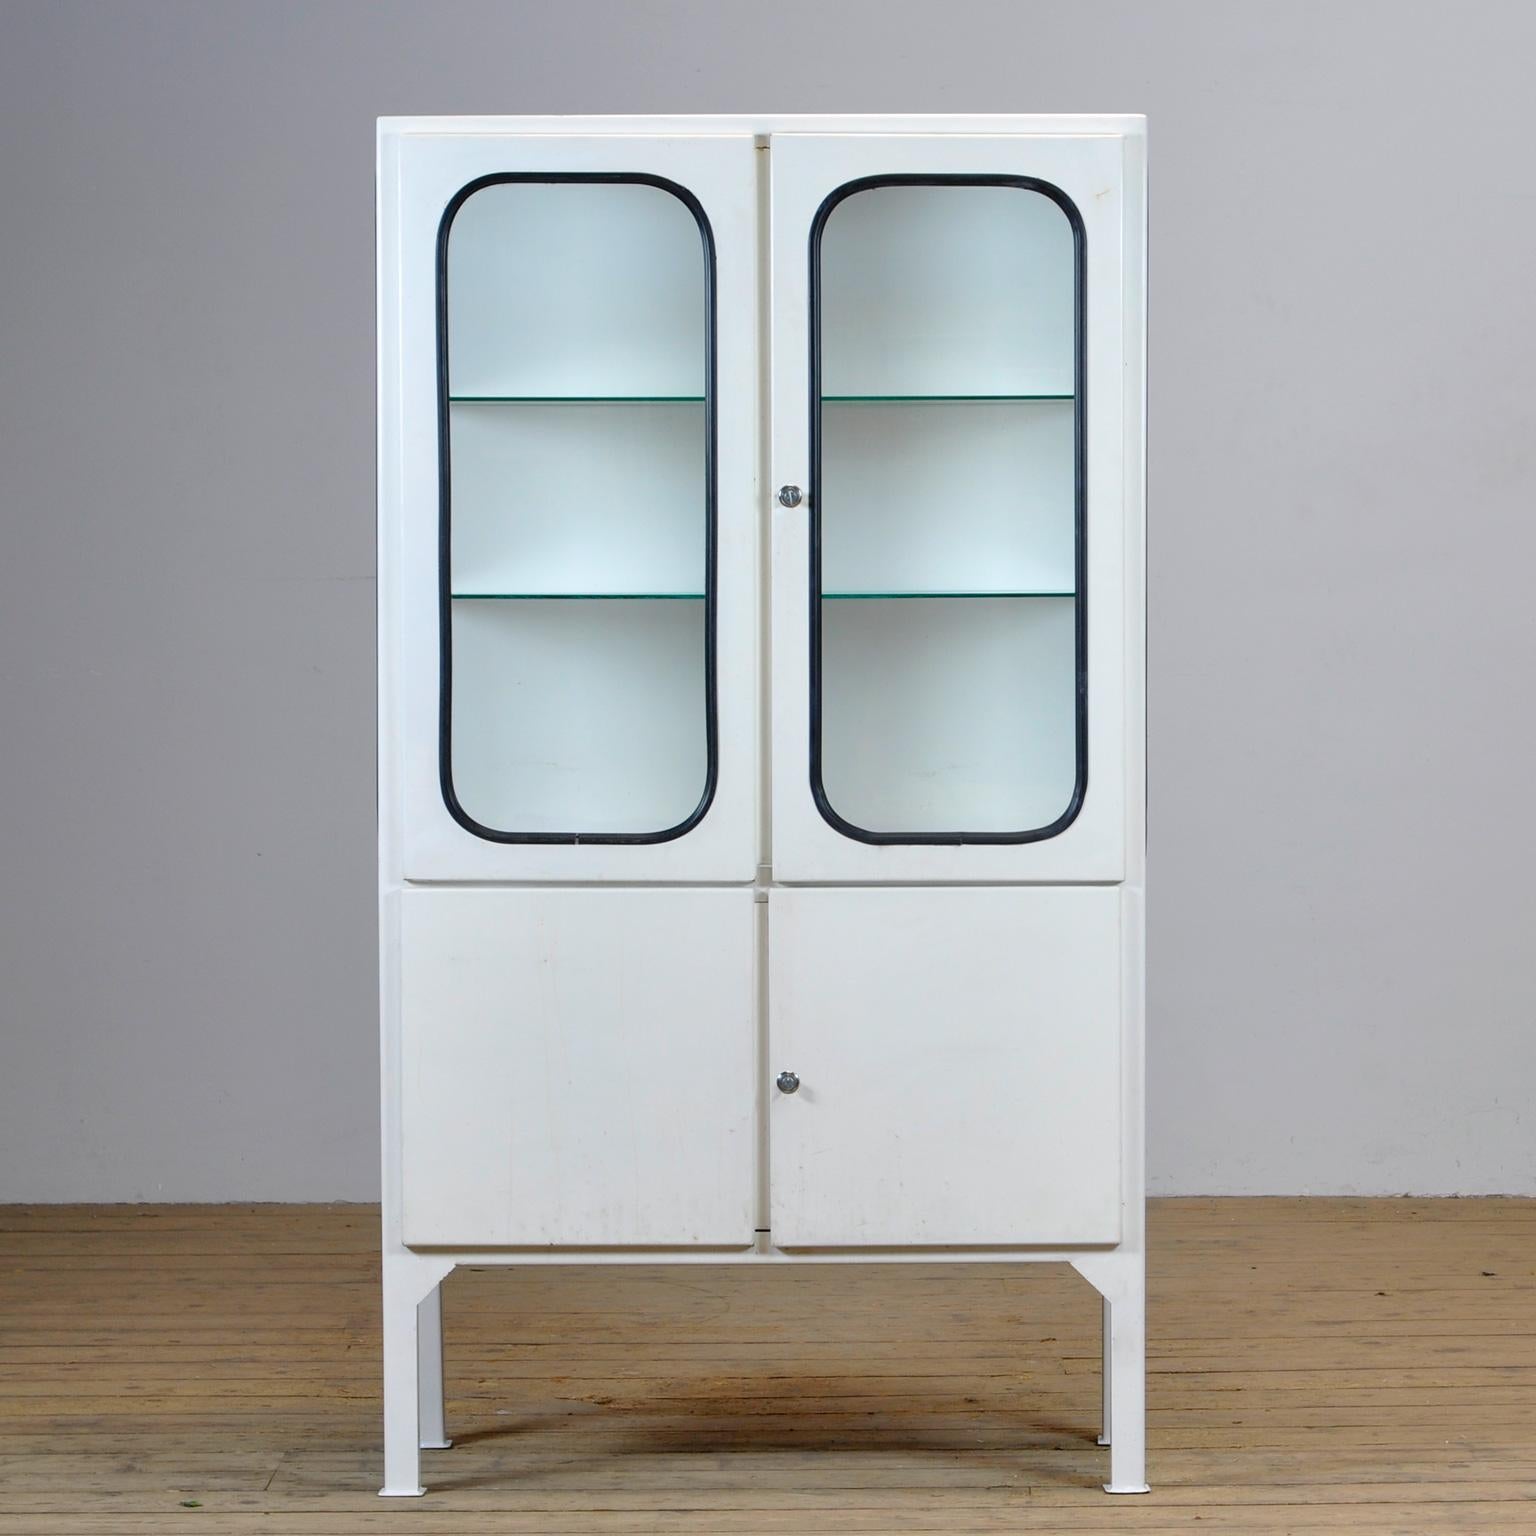 This medical cabinet was designed in the 1970s and was produced circa 1975 in Hungary. It is made from iron and glass, and the glass is held by a black rubber strip. The cabinet features two adjustable glass shelves and functioning locks. 